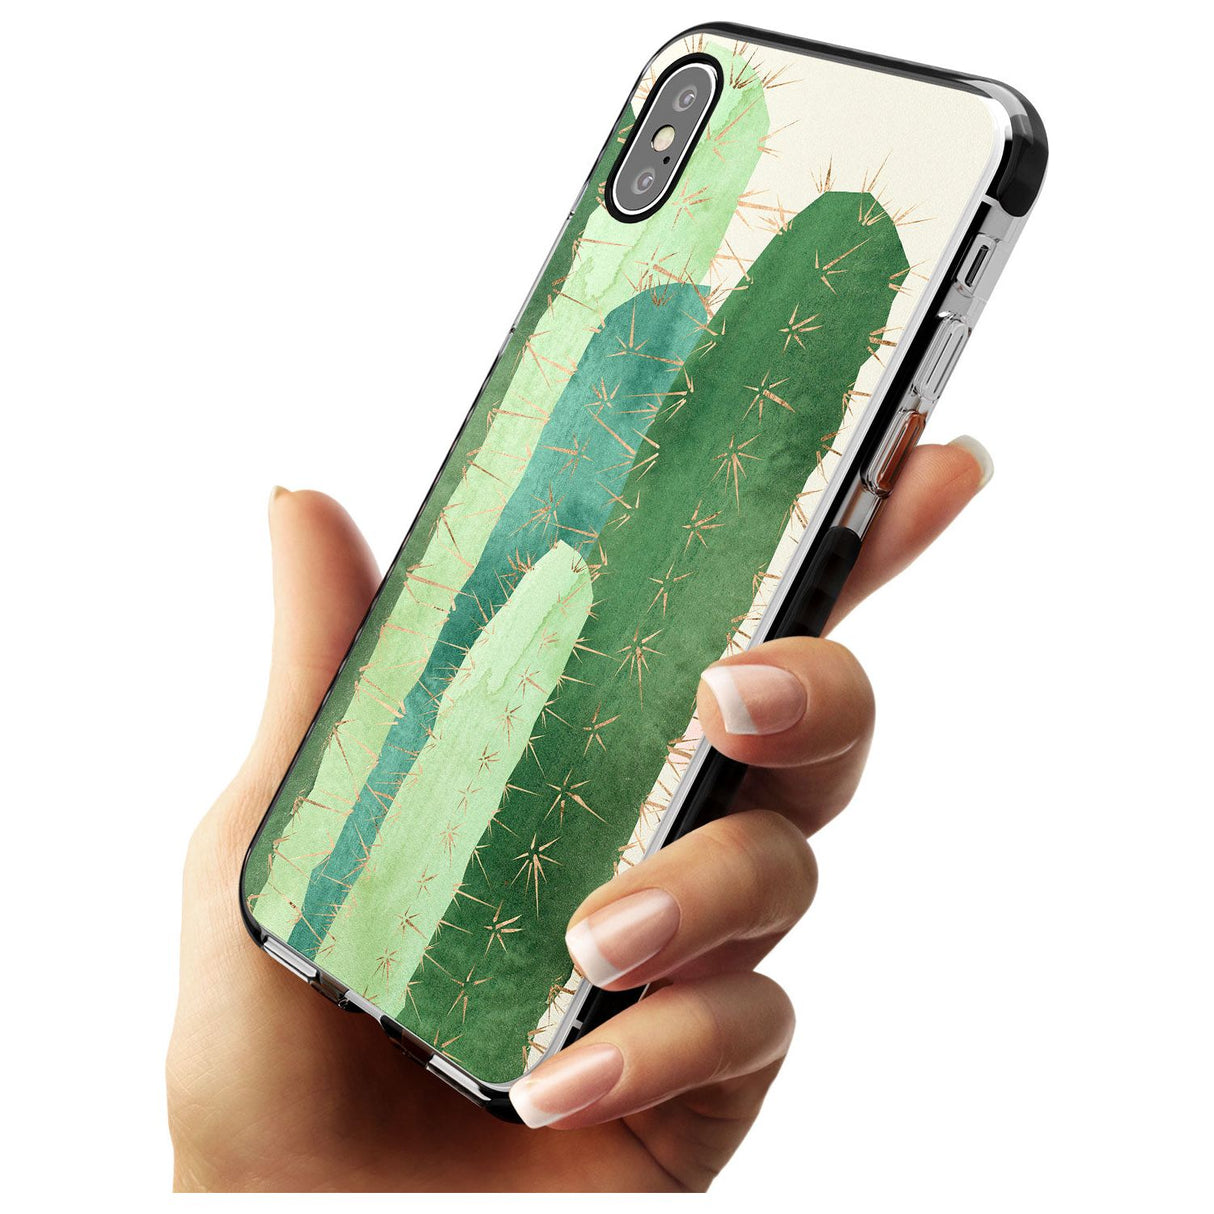 Large Cacti Mix Design Black Impact Phone Case for iPhone X XS Max XR